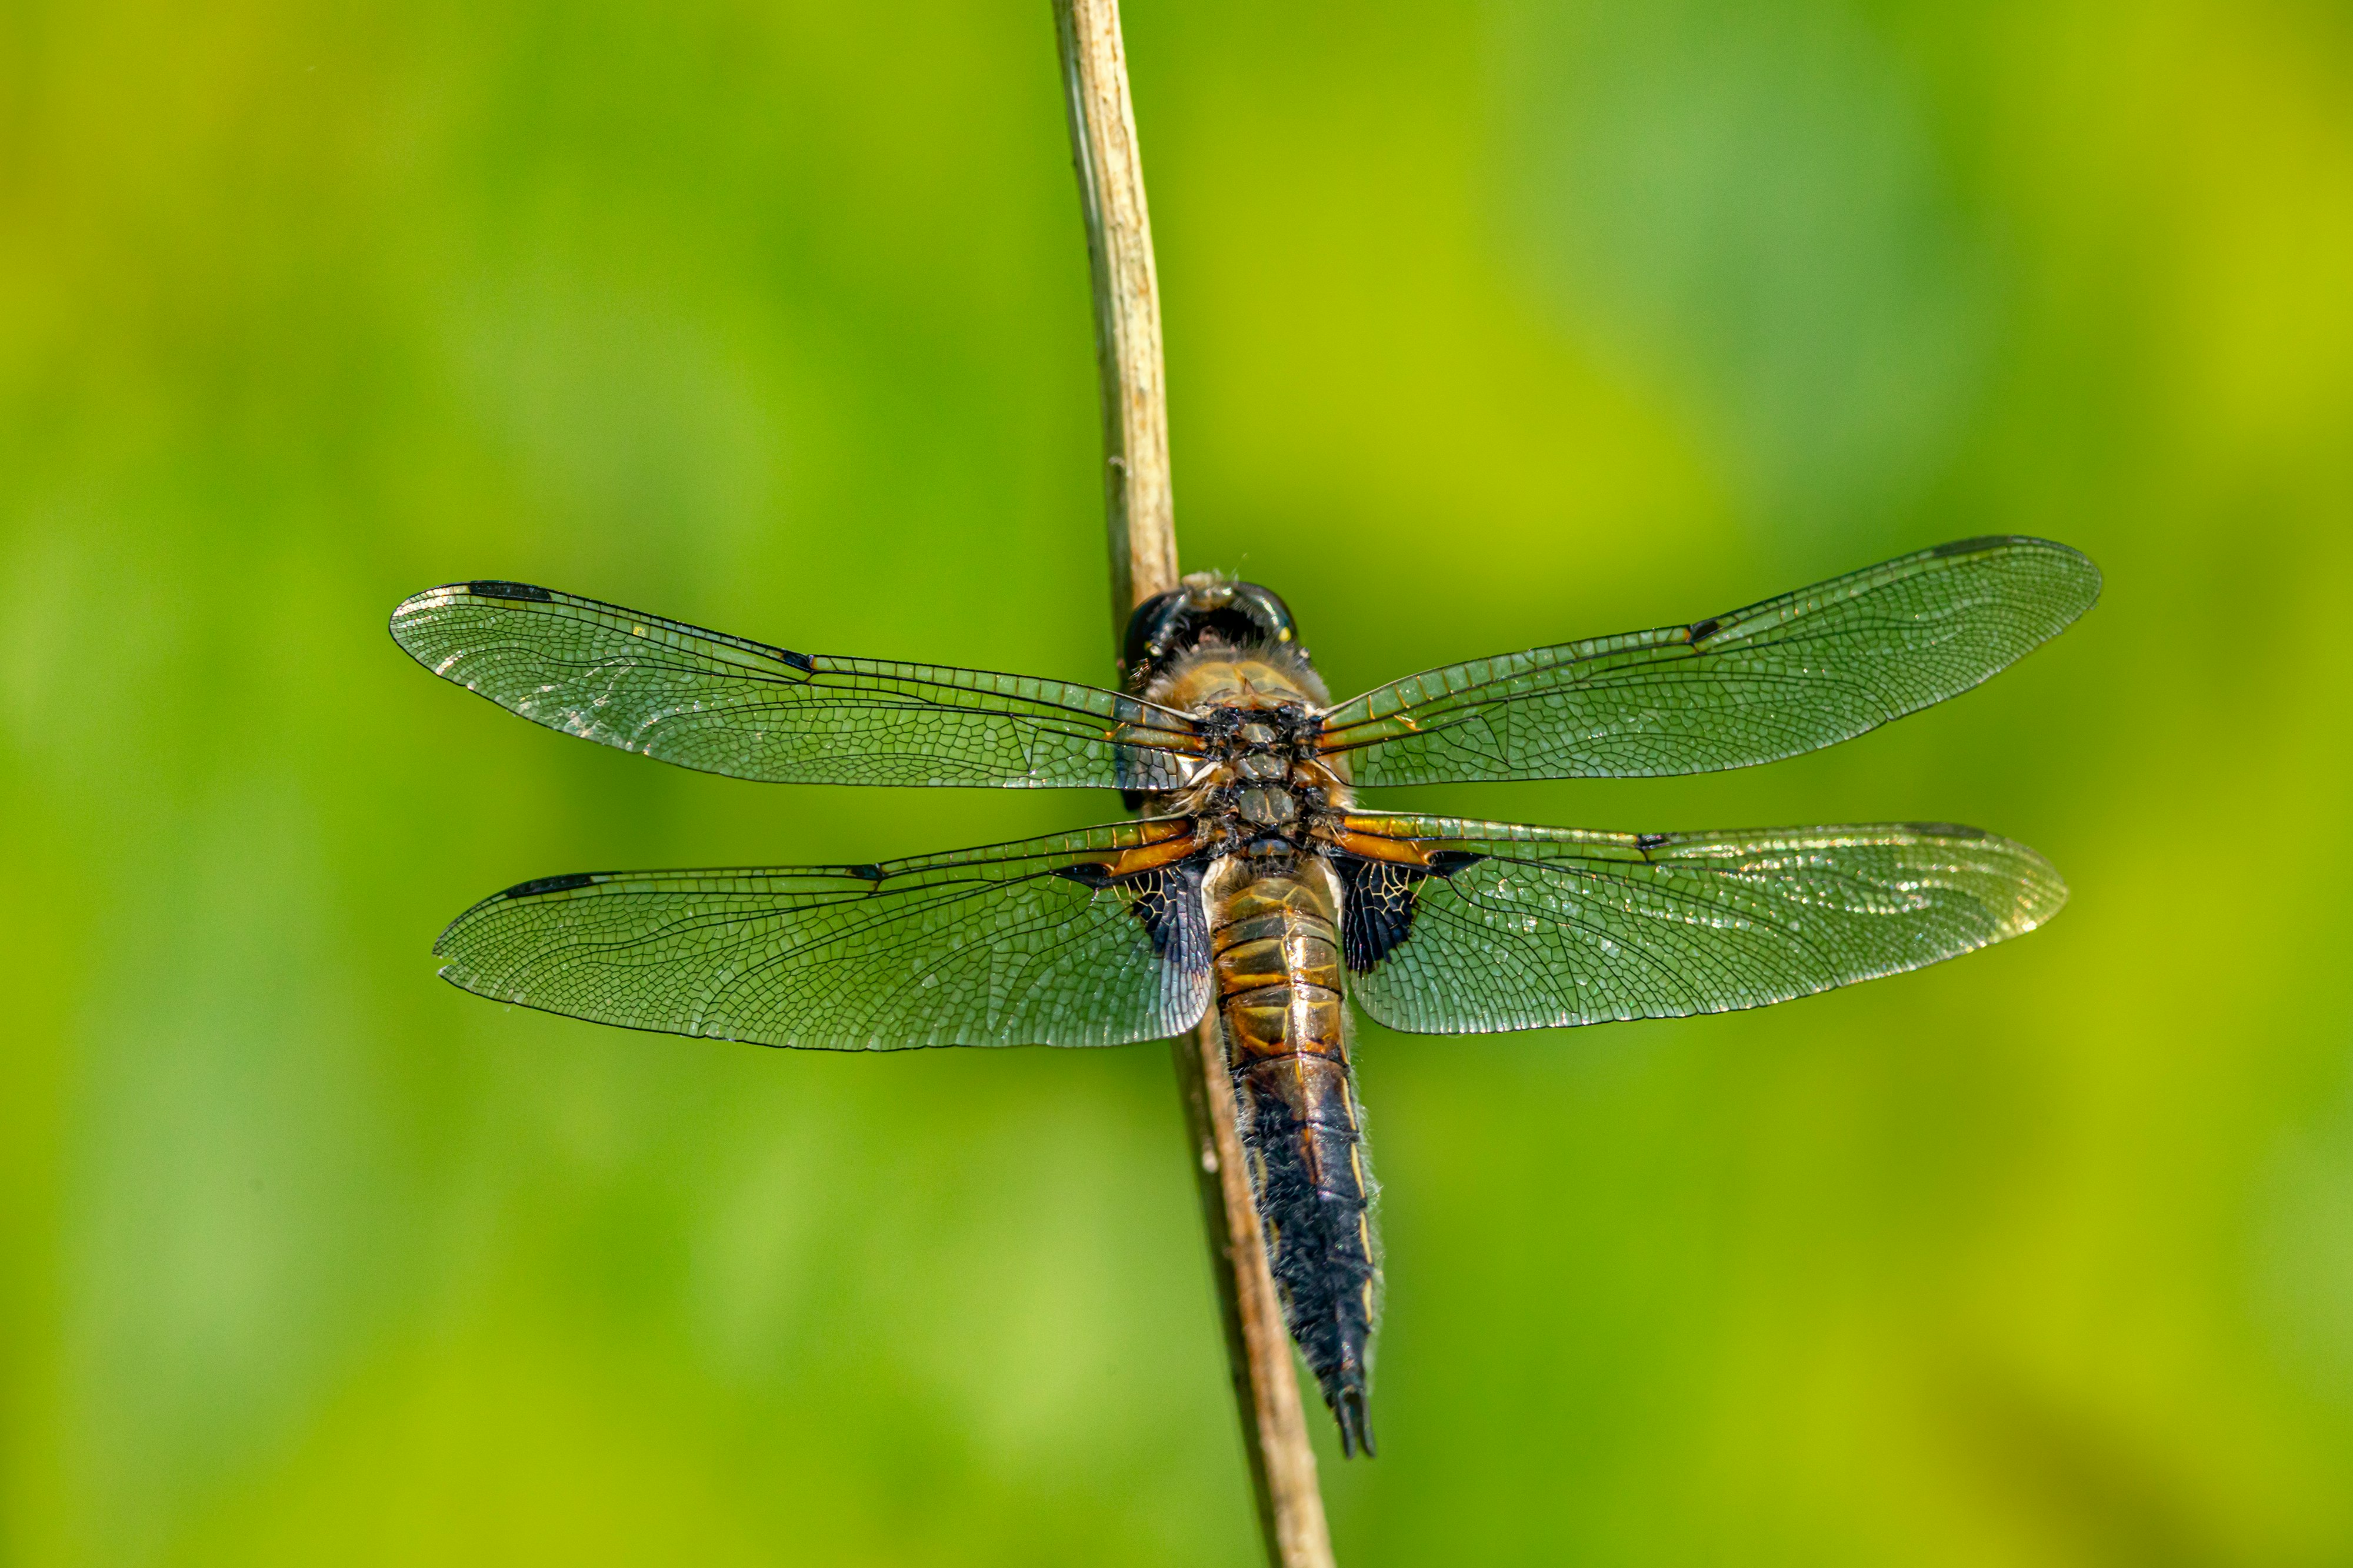 blue and brown dragonfly perched on brown stick in close up photography during daytime